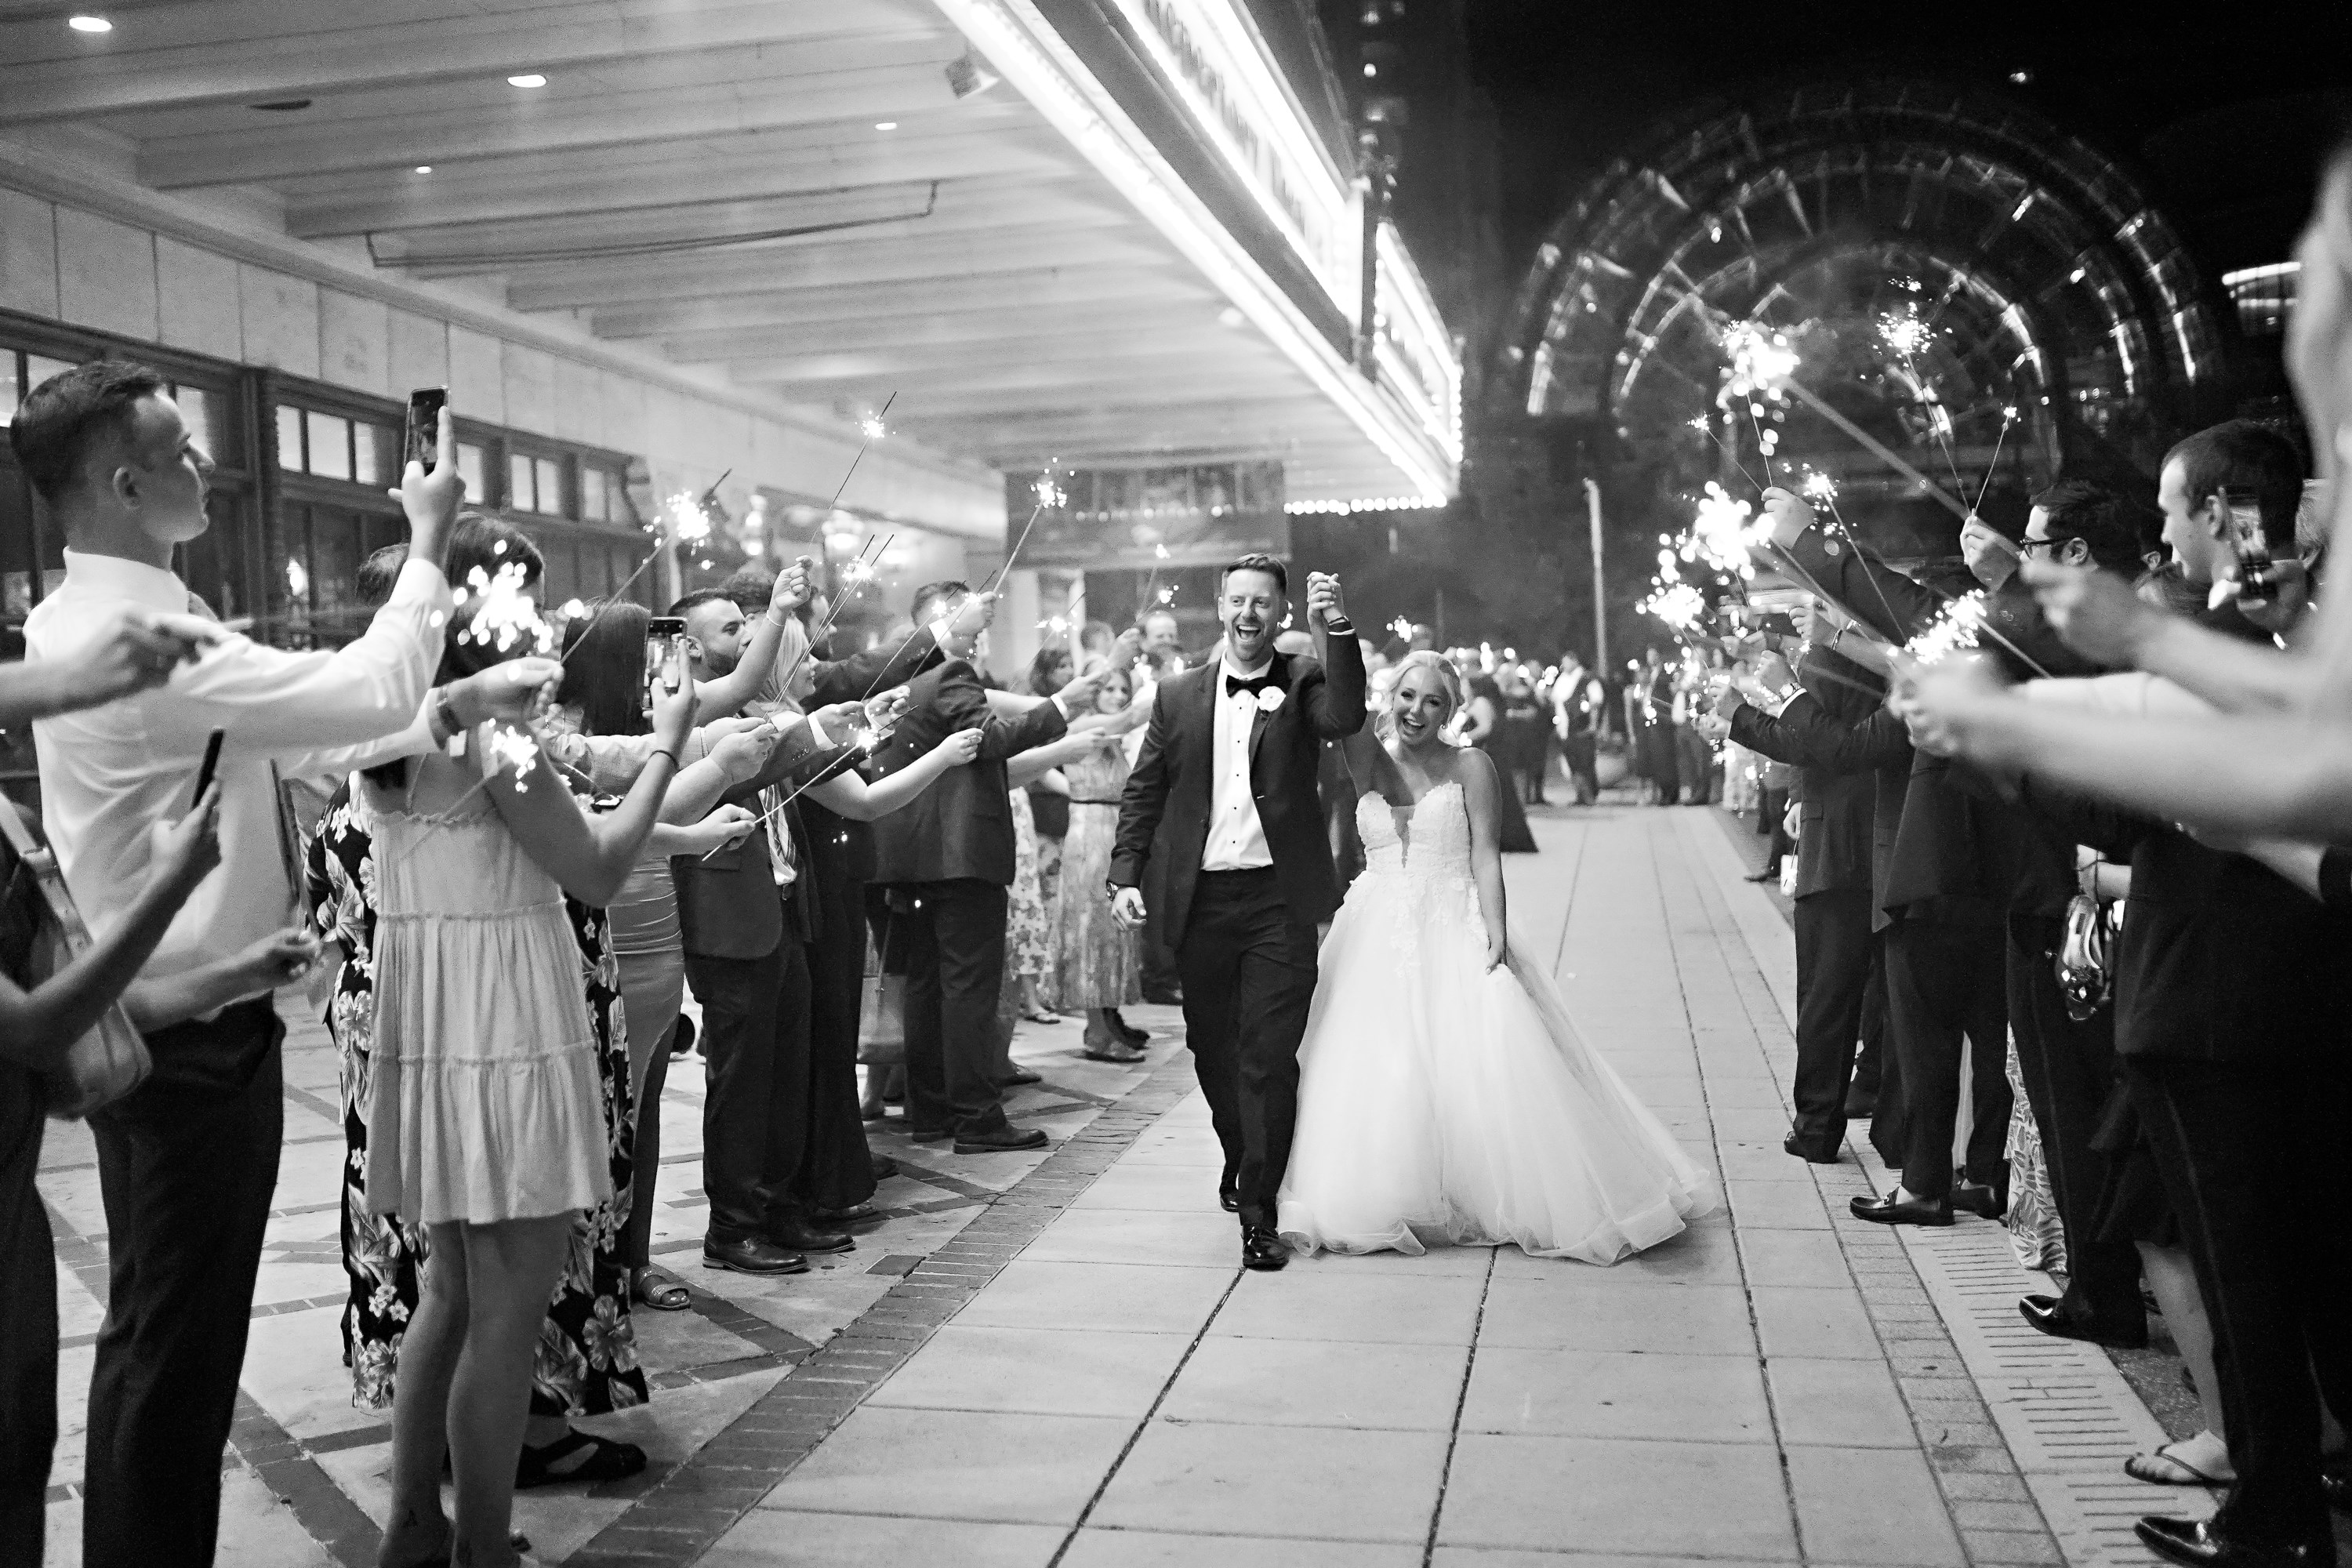 Magnificent Sparkler Wedding Exit - Indiana Roof Ballroom in Downtown Indianapolis